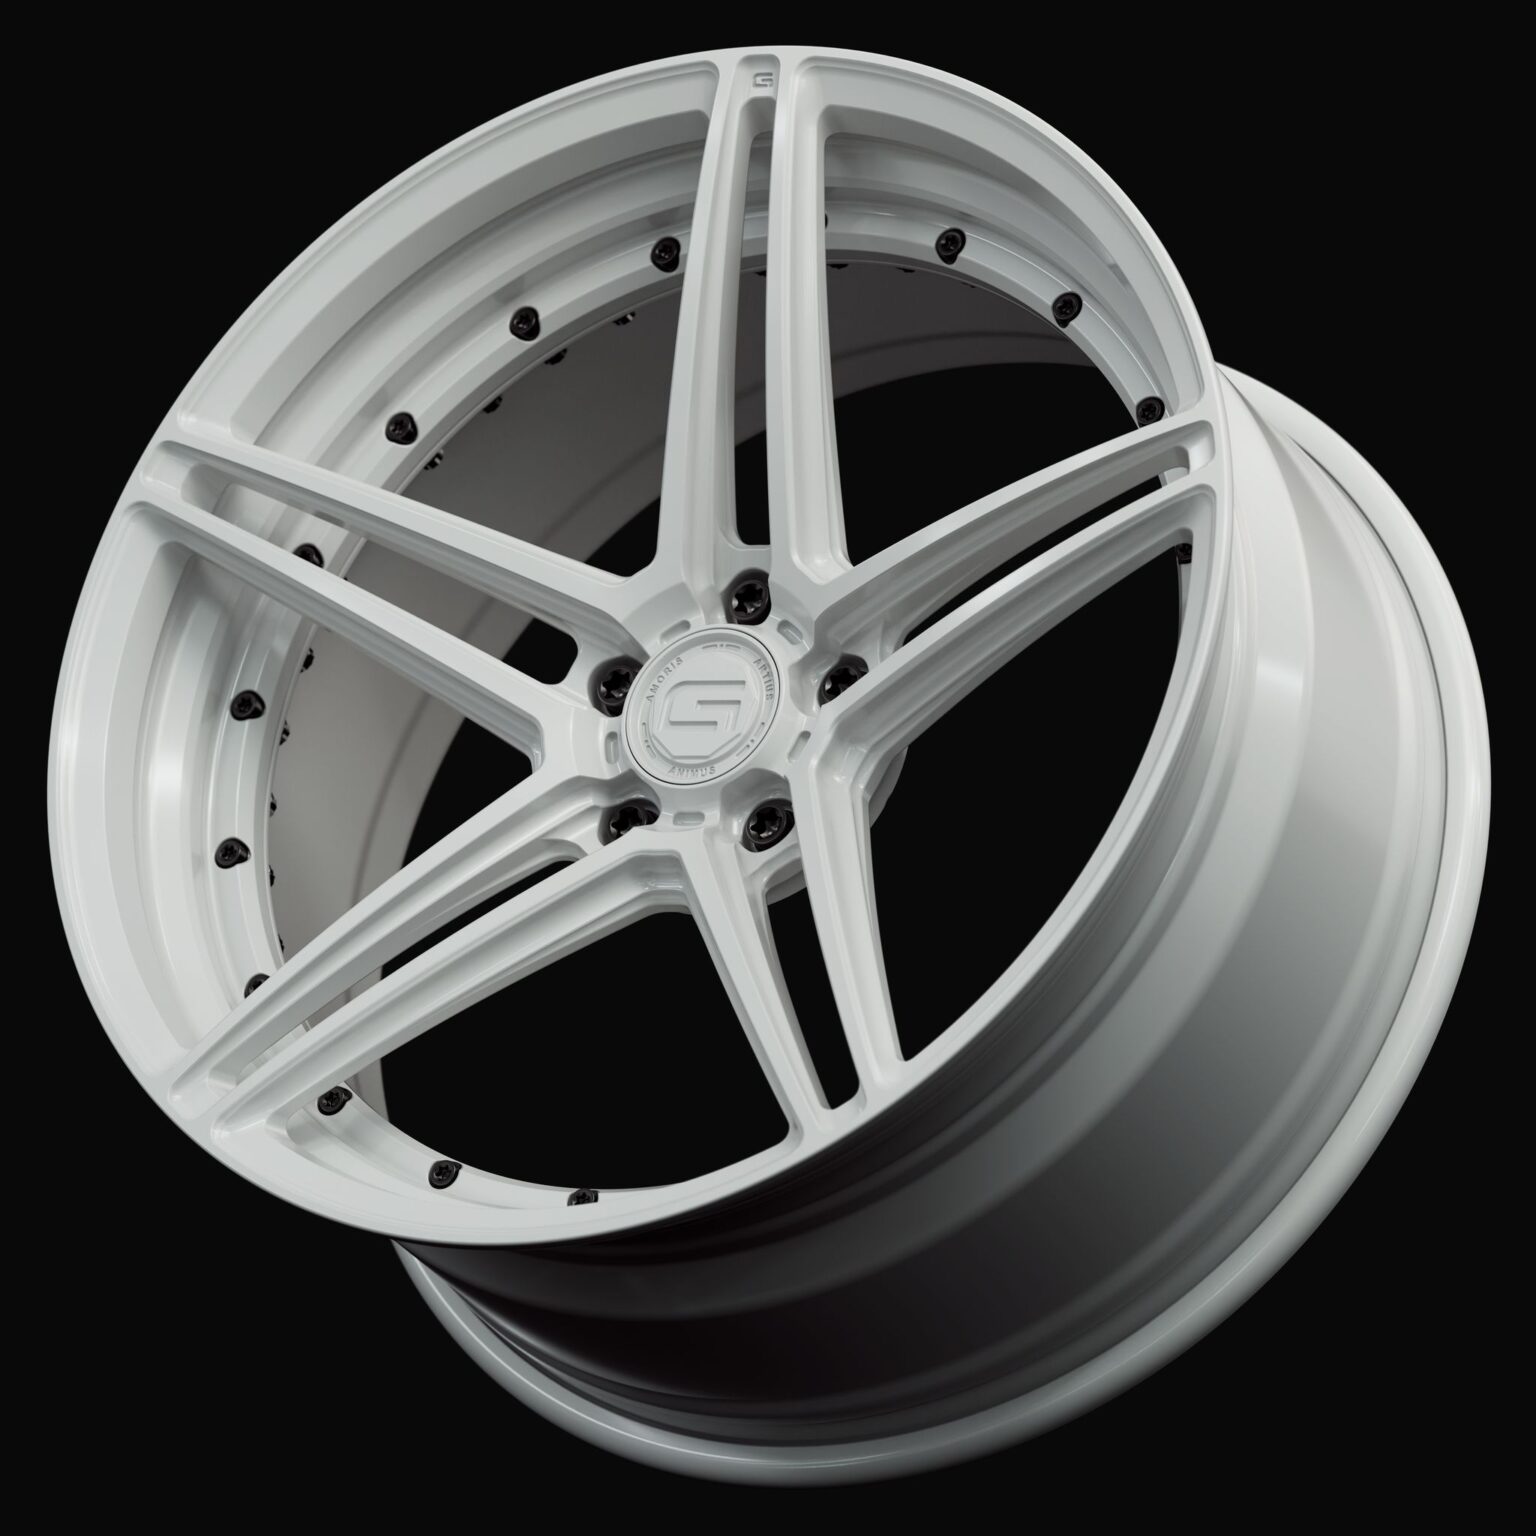 Three-quarter view of a white G51 duoblock wheel from Govad Forged Track series